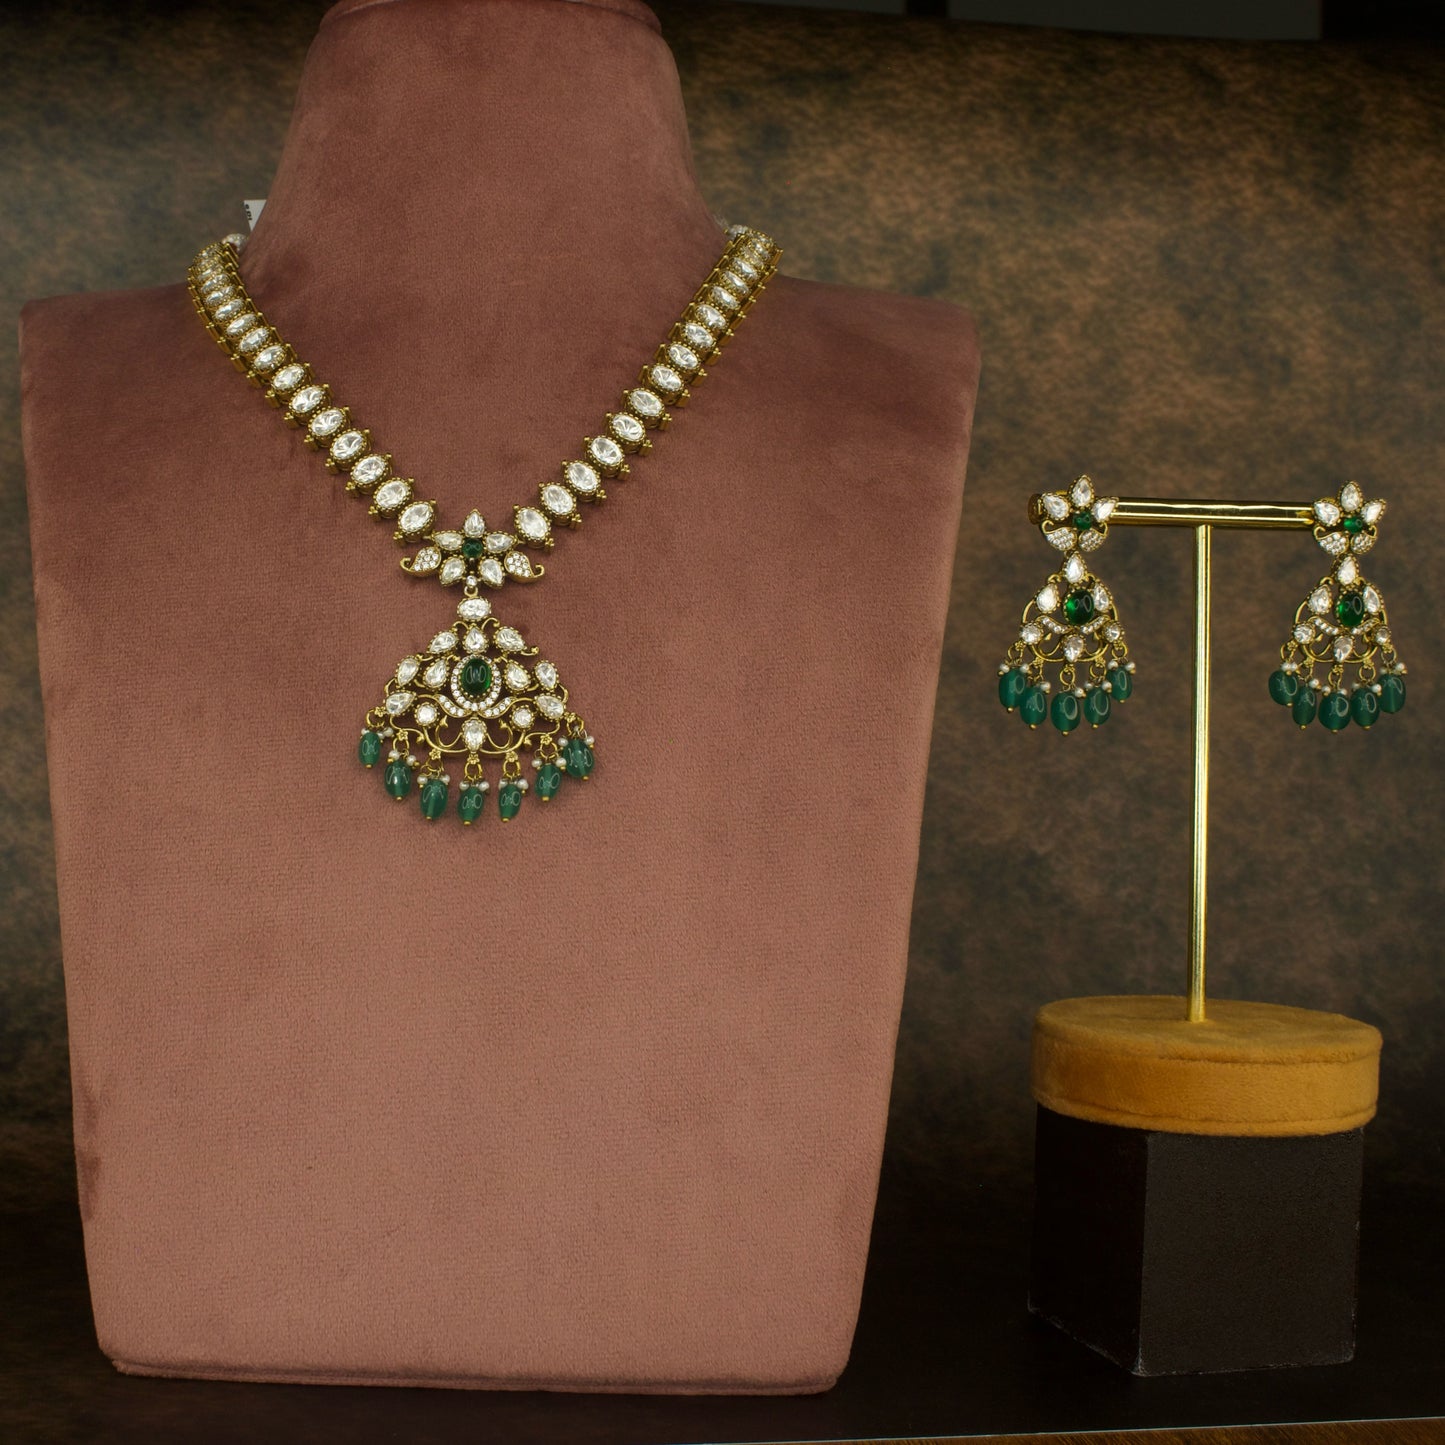 Single Layer Polki Victorian Necklace Set with High Quality Victorian Finish. This product belongs to Victorian Jewellery category